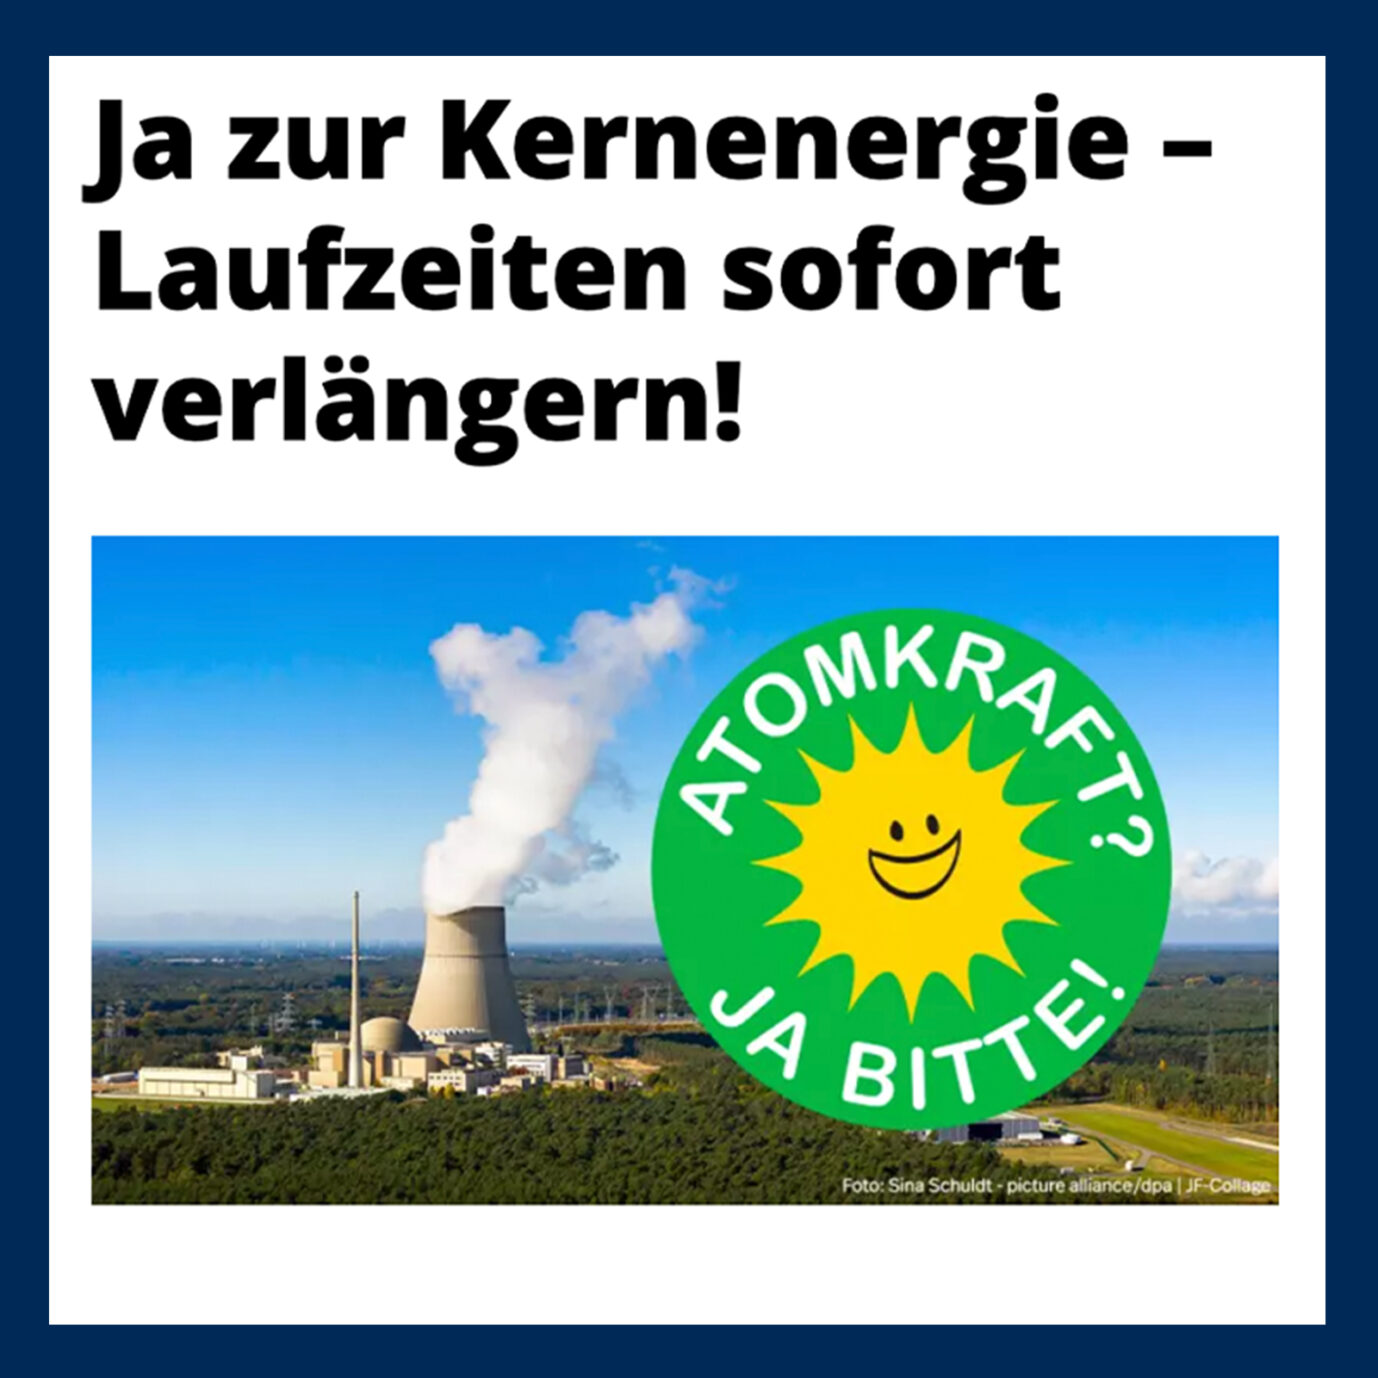 >> Click here for the petition Petition “Yes to nuclear energy” / Photo: JF” width=”640″ height=”640″ srcset=”https://assets.jungefreiheit.de/2023/03/Unbenannt-1.jpg 1378w, https://assets.jungefreiheit.de/2023/03/Unbenannt-1-900×900.jpg 900w, https://assets.jungefreiheit.de/2023/03/Unbenannt-1-180×180.jpg 180w, https://assets.jungefreiheit.de/2023/03/Unbenannt-1-768×768.jpg 768w” sizes=”(max-width: 640px) 100vw, 640px”/><figcaption id=